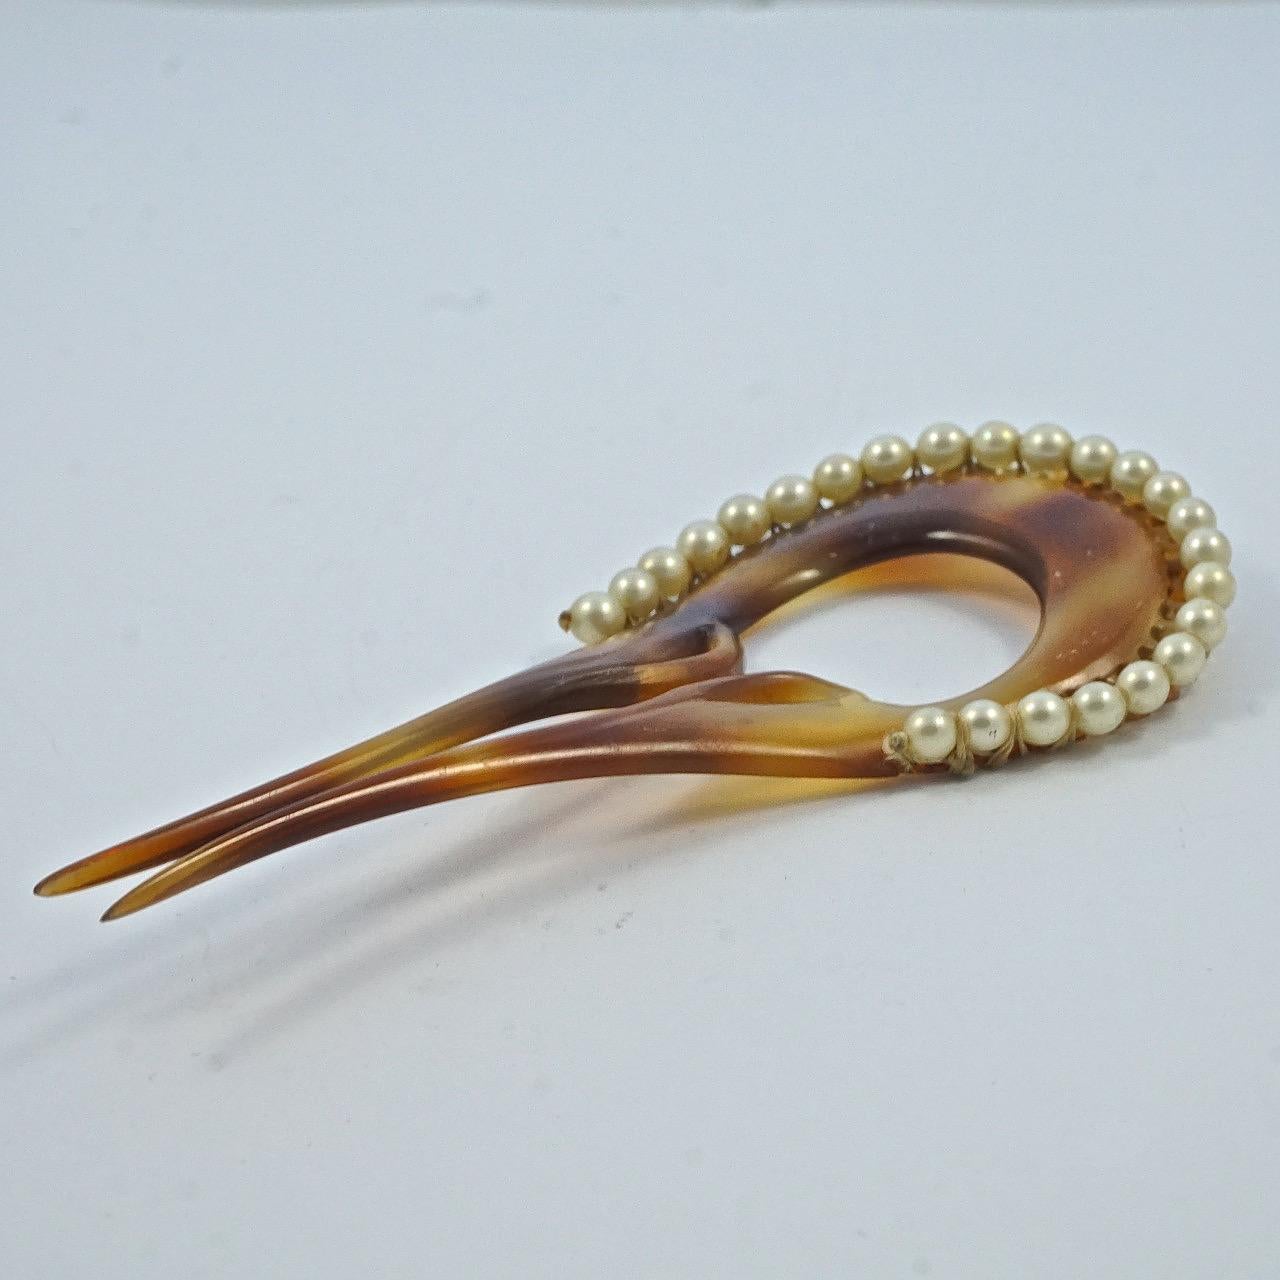 Art Deco Faux Tortoiseshell Two Prong Hair Comb with Faux Pearls In Good Condition For Sale In London, GB